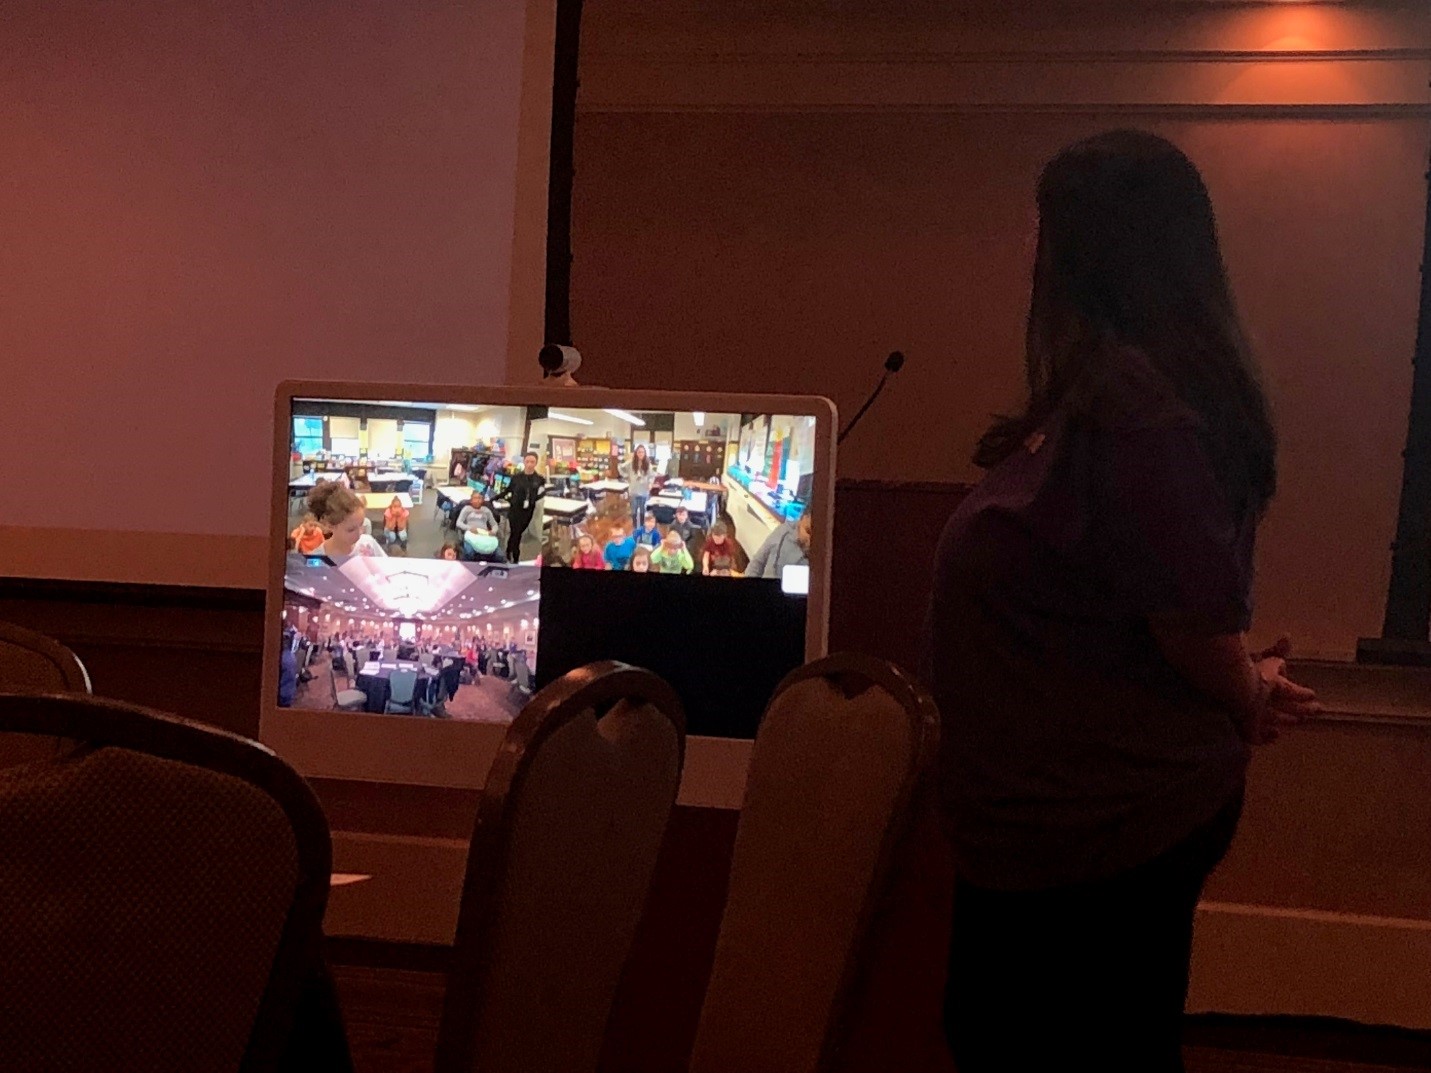 Sheevers connecting with two classrooms at TCSD through video conferencing at the NERIC conference